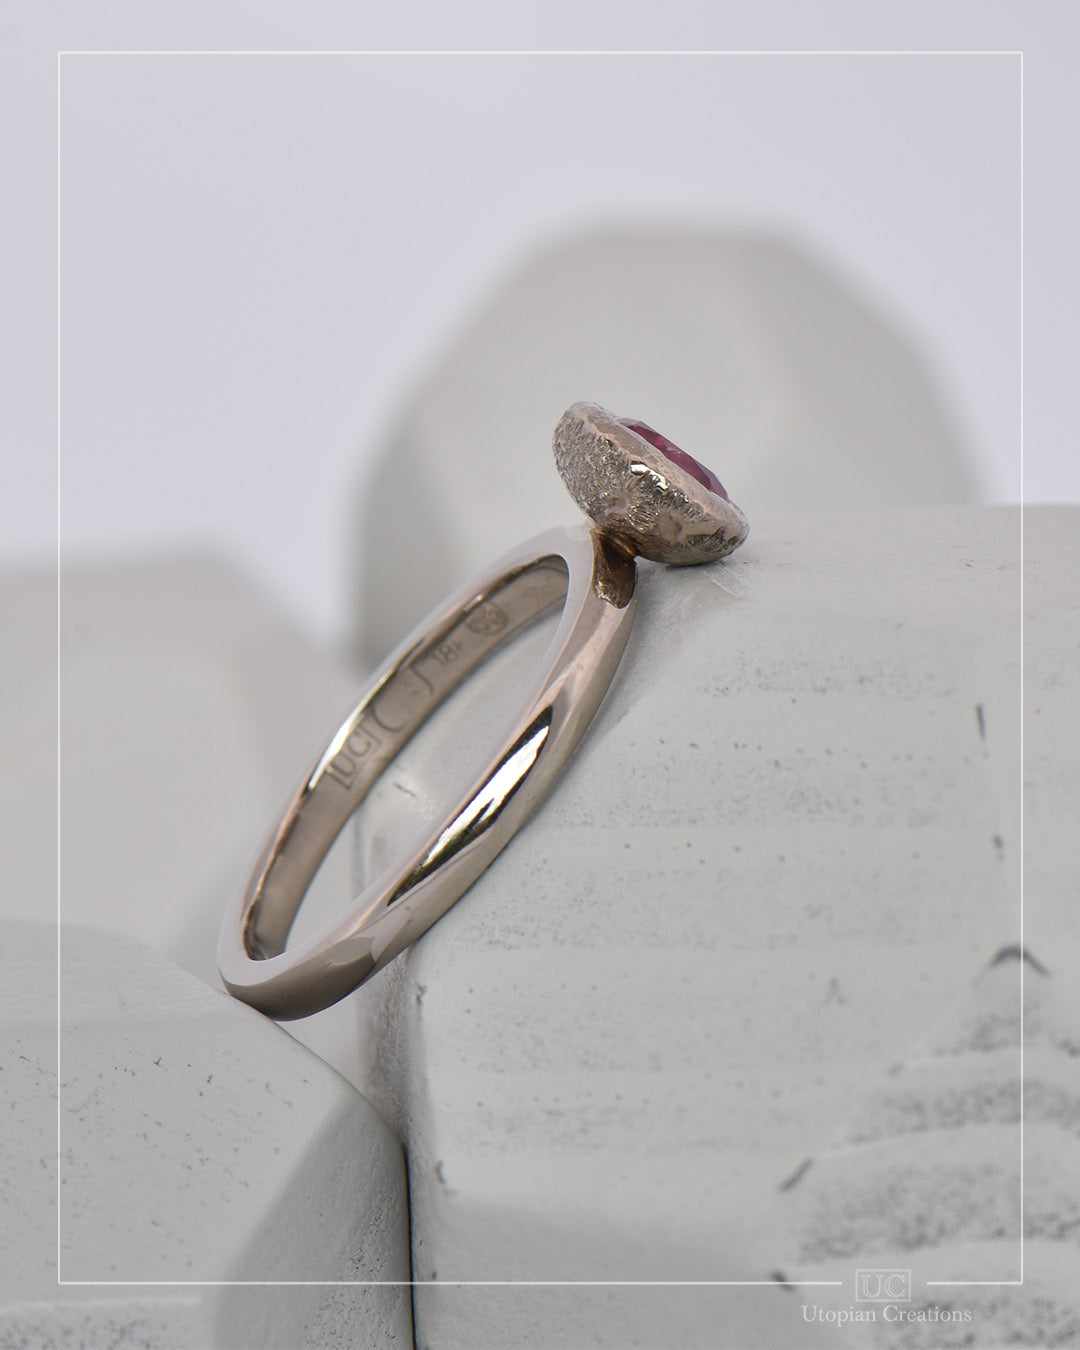 Pebble Solitaire Ring - Hot Pink Sapphire